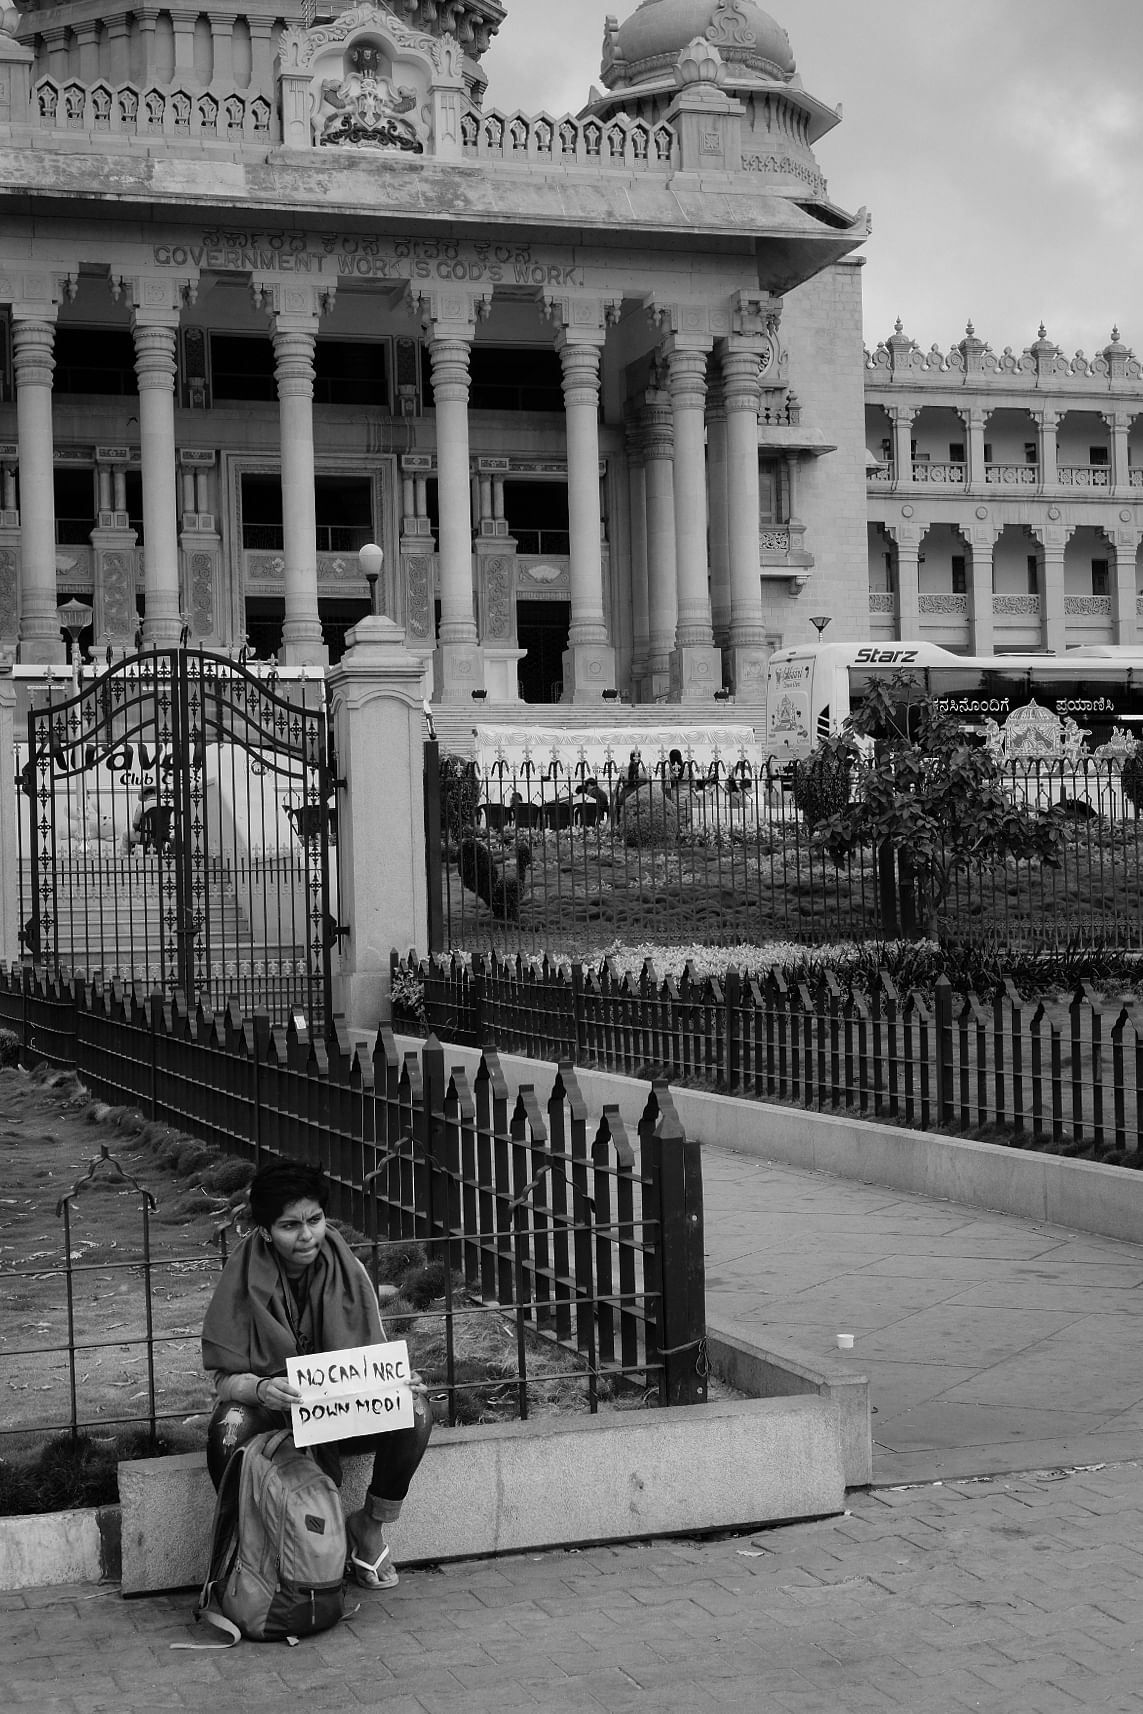 The Special Investigation Team (SIT) is also investigating a January 7 incident which saw Amulya Leona sit in front of Vidhana Soudha with an anti-CAA placard. (Credit: Subhash Urs)